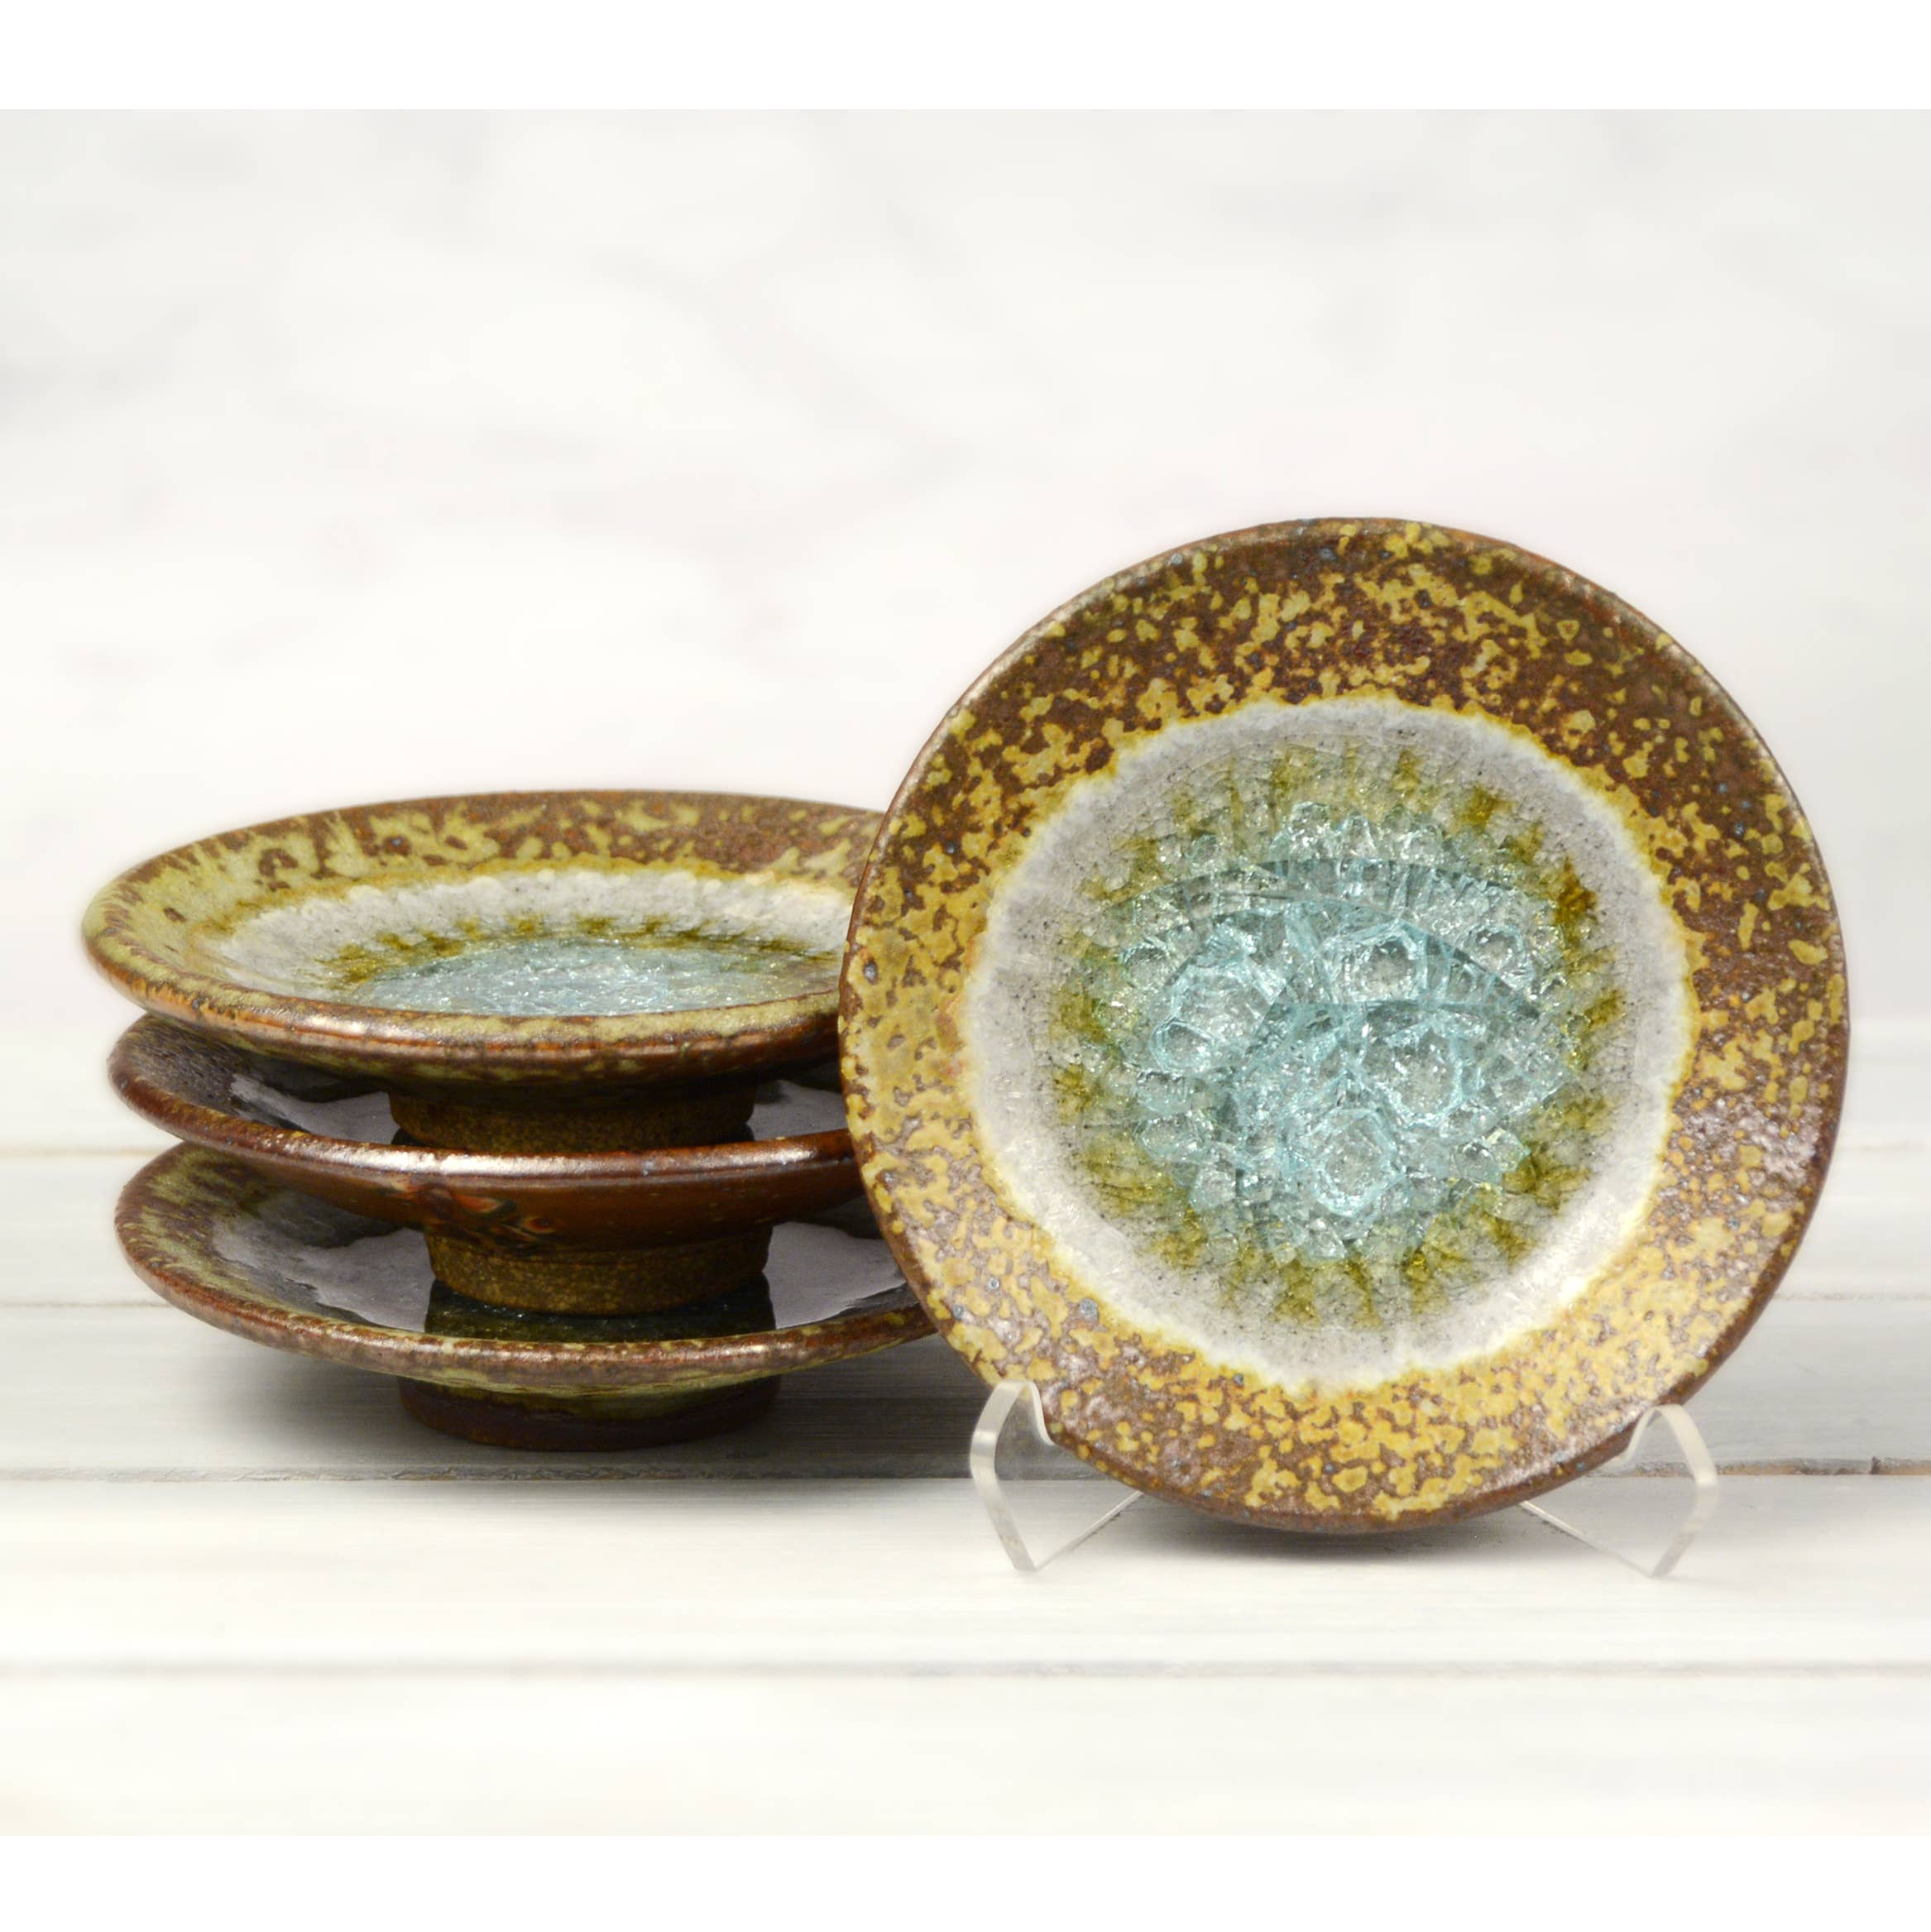 Wasabi/Dipping Dish - With Glass